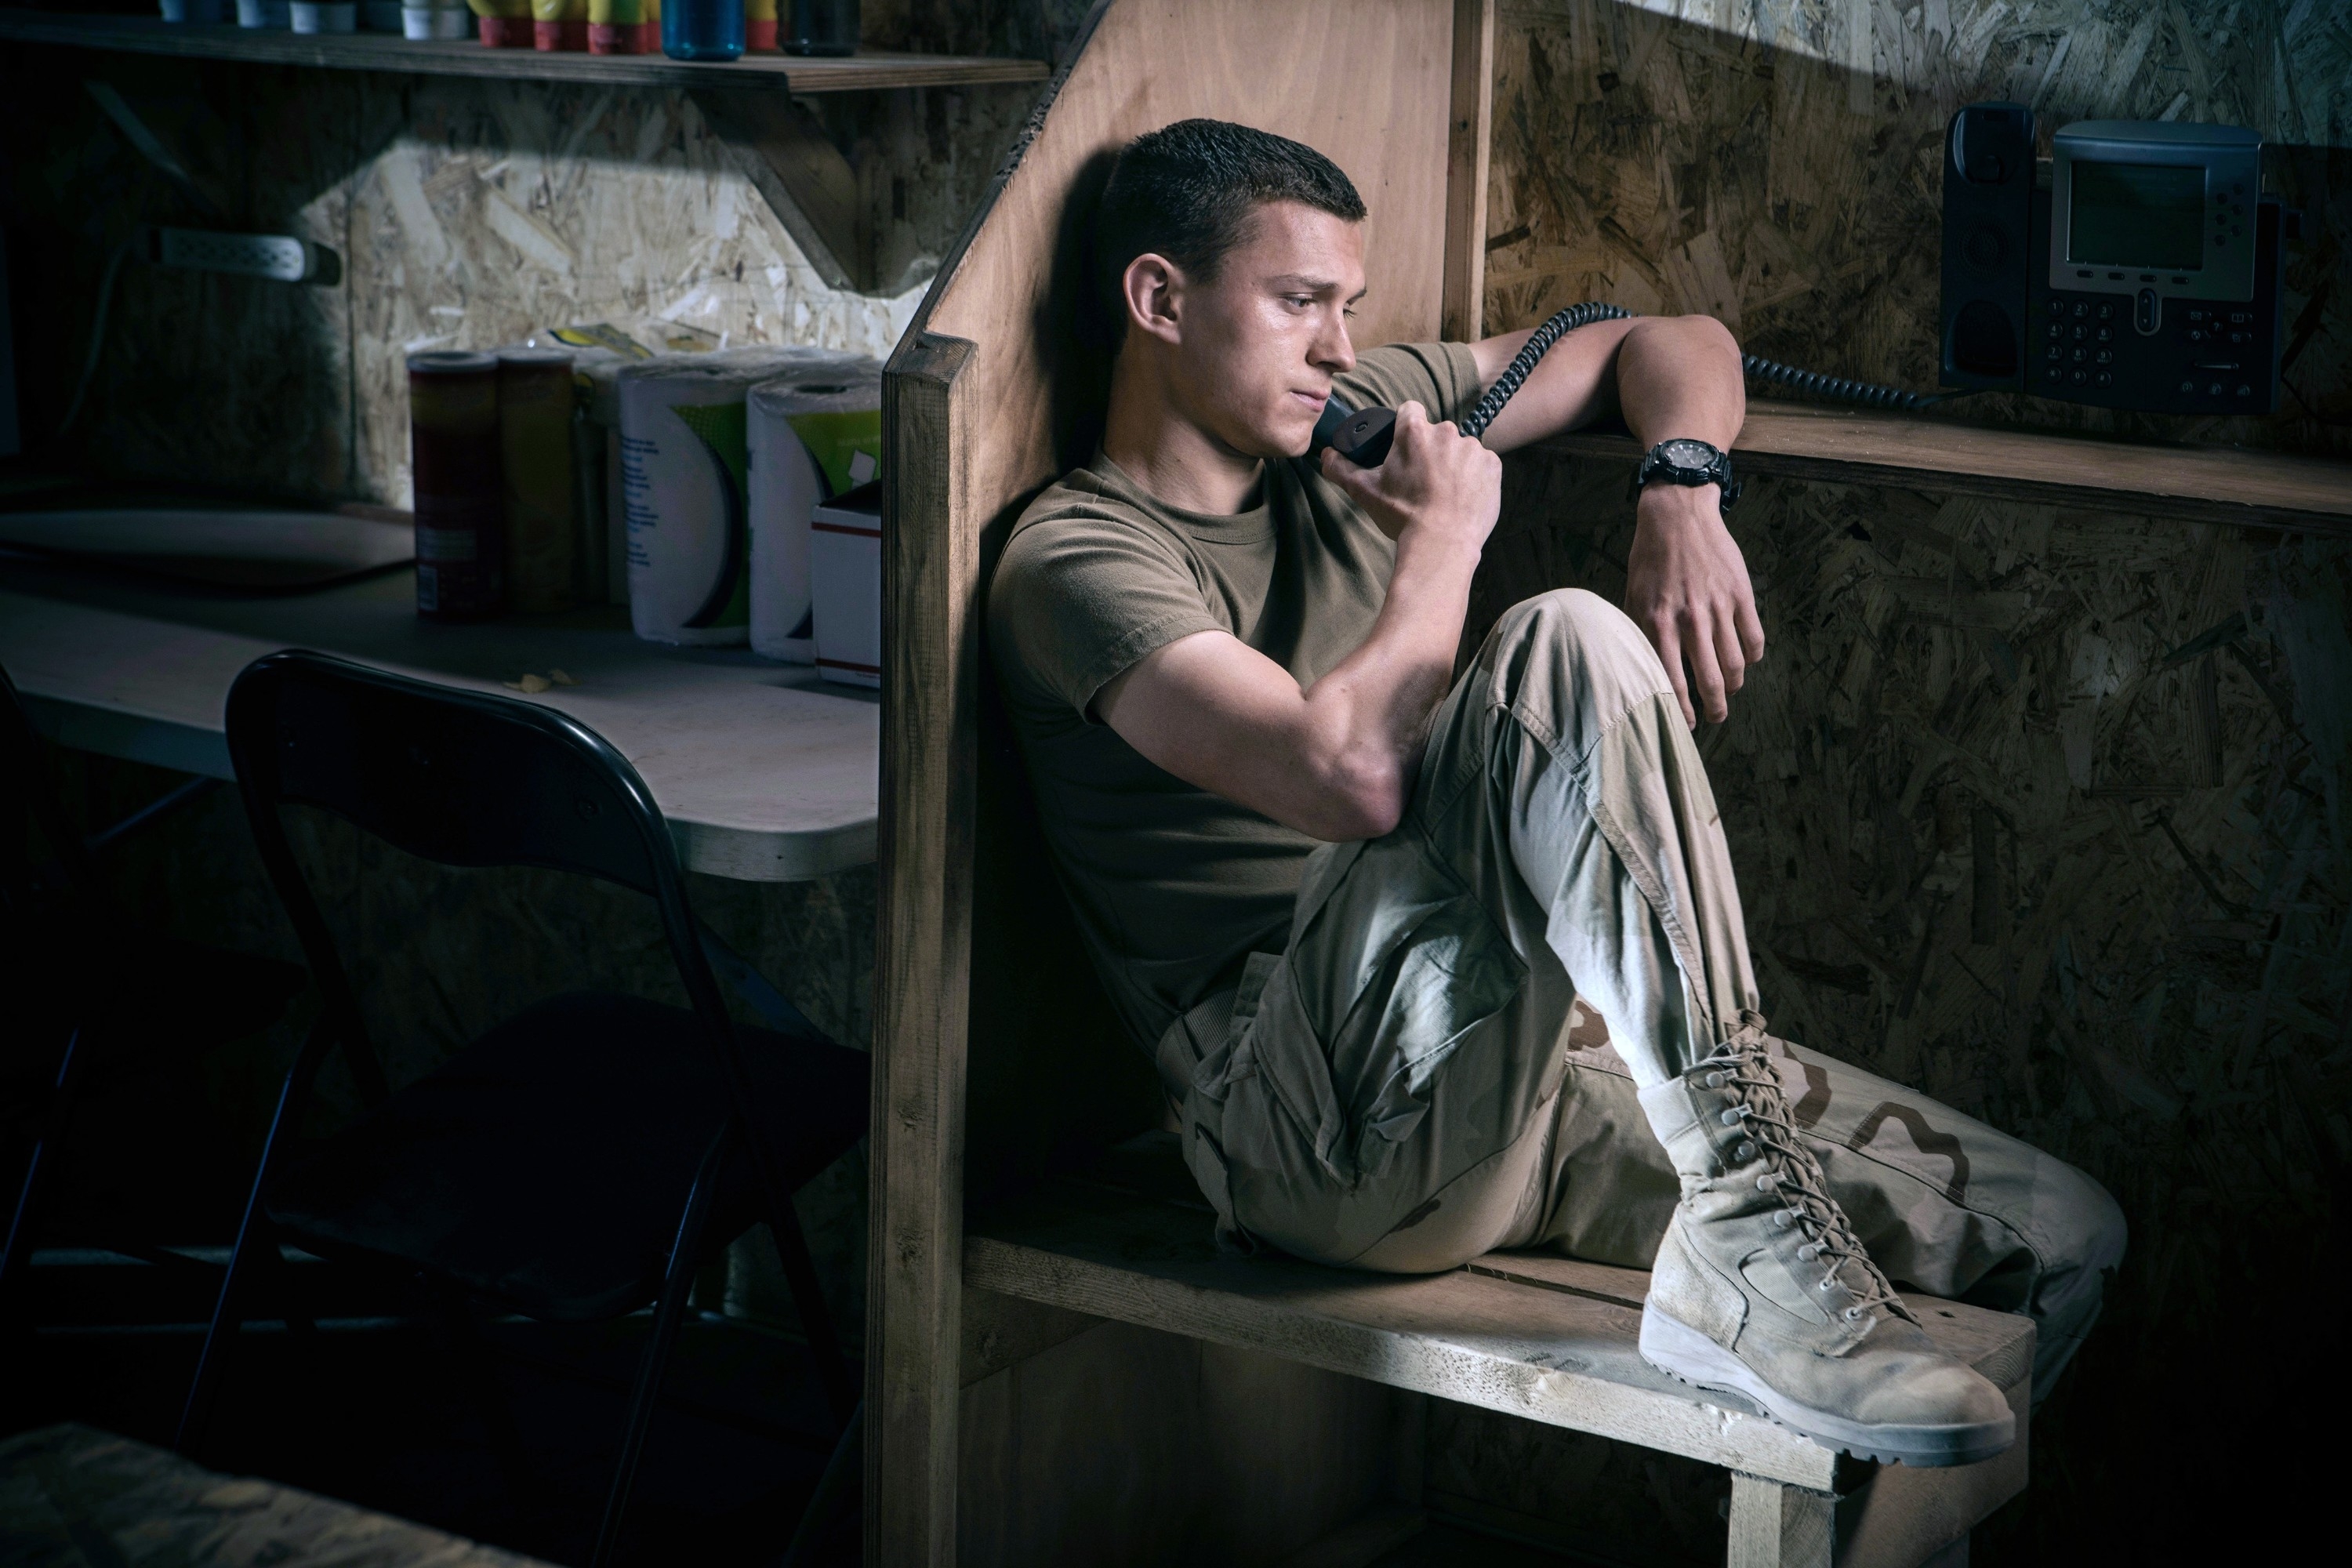 in a scene, Tom in military outfit sitting, talking on a corded phone, in a dimly lit wooden booth